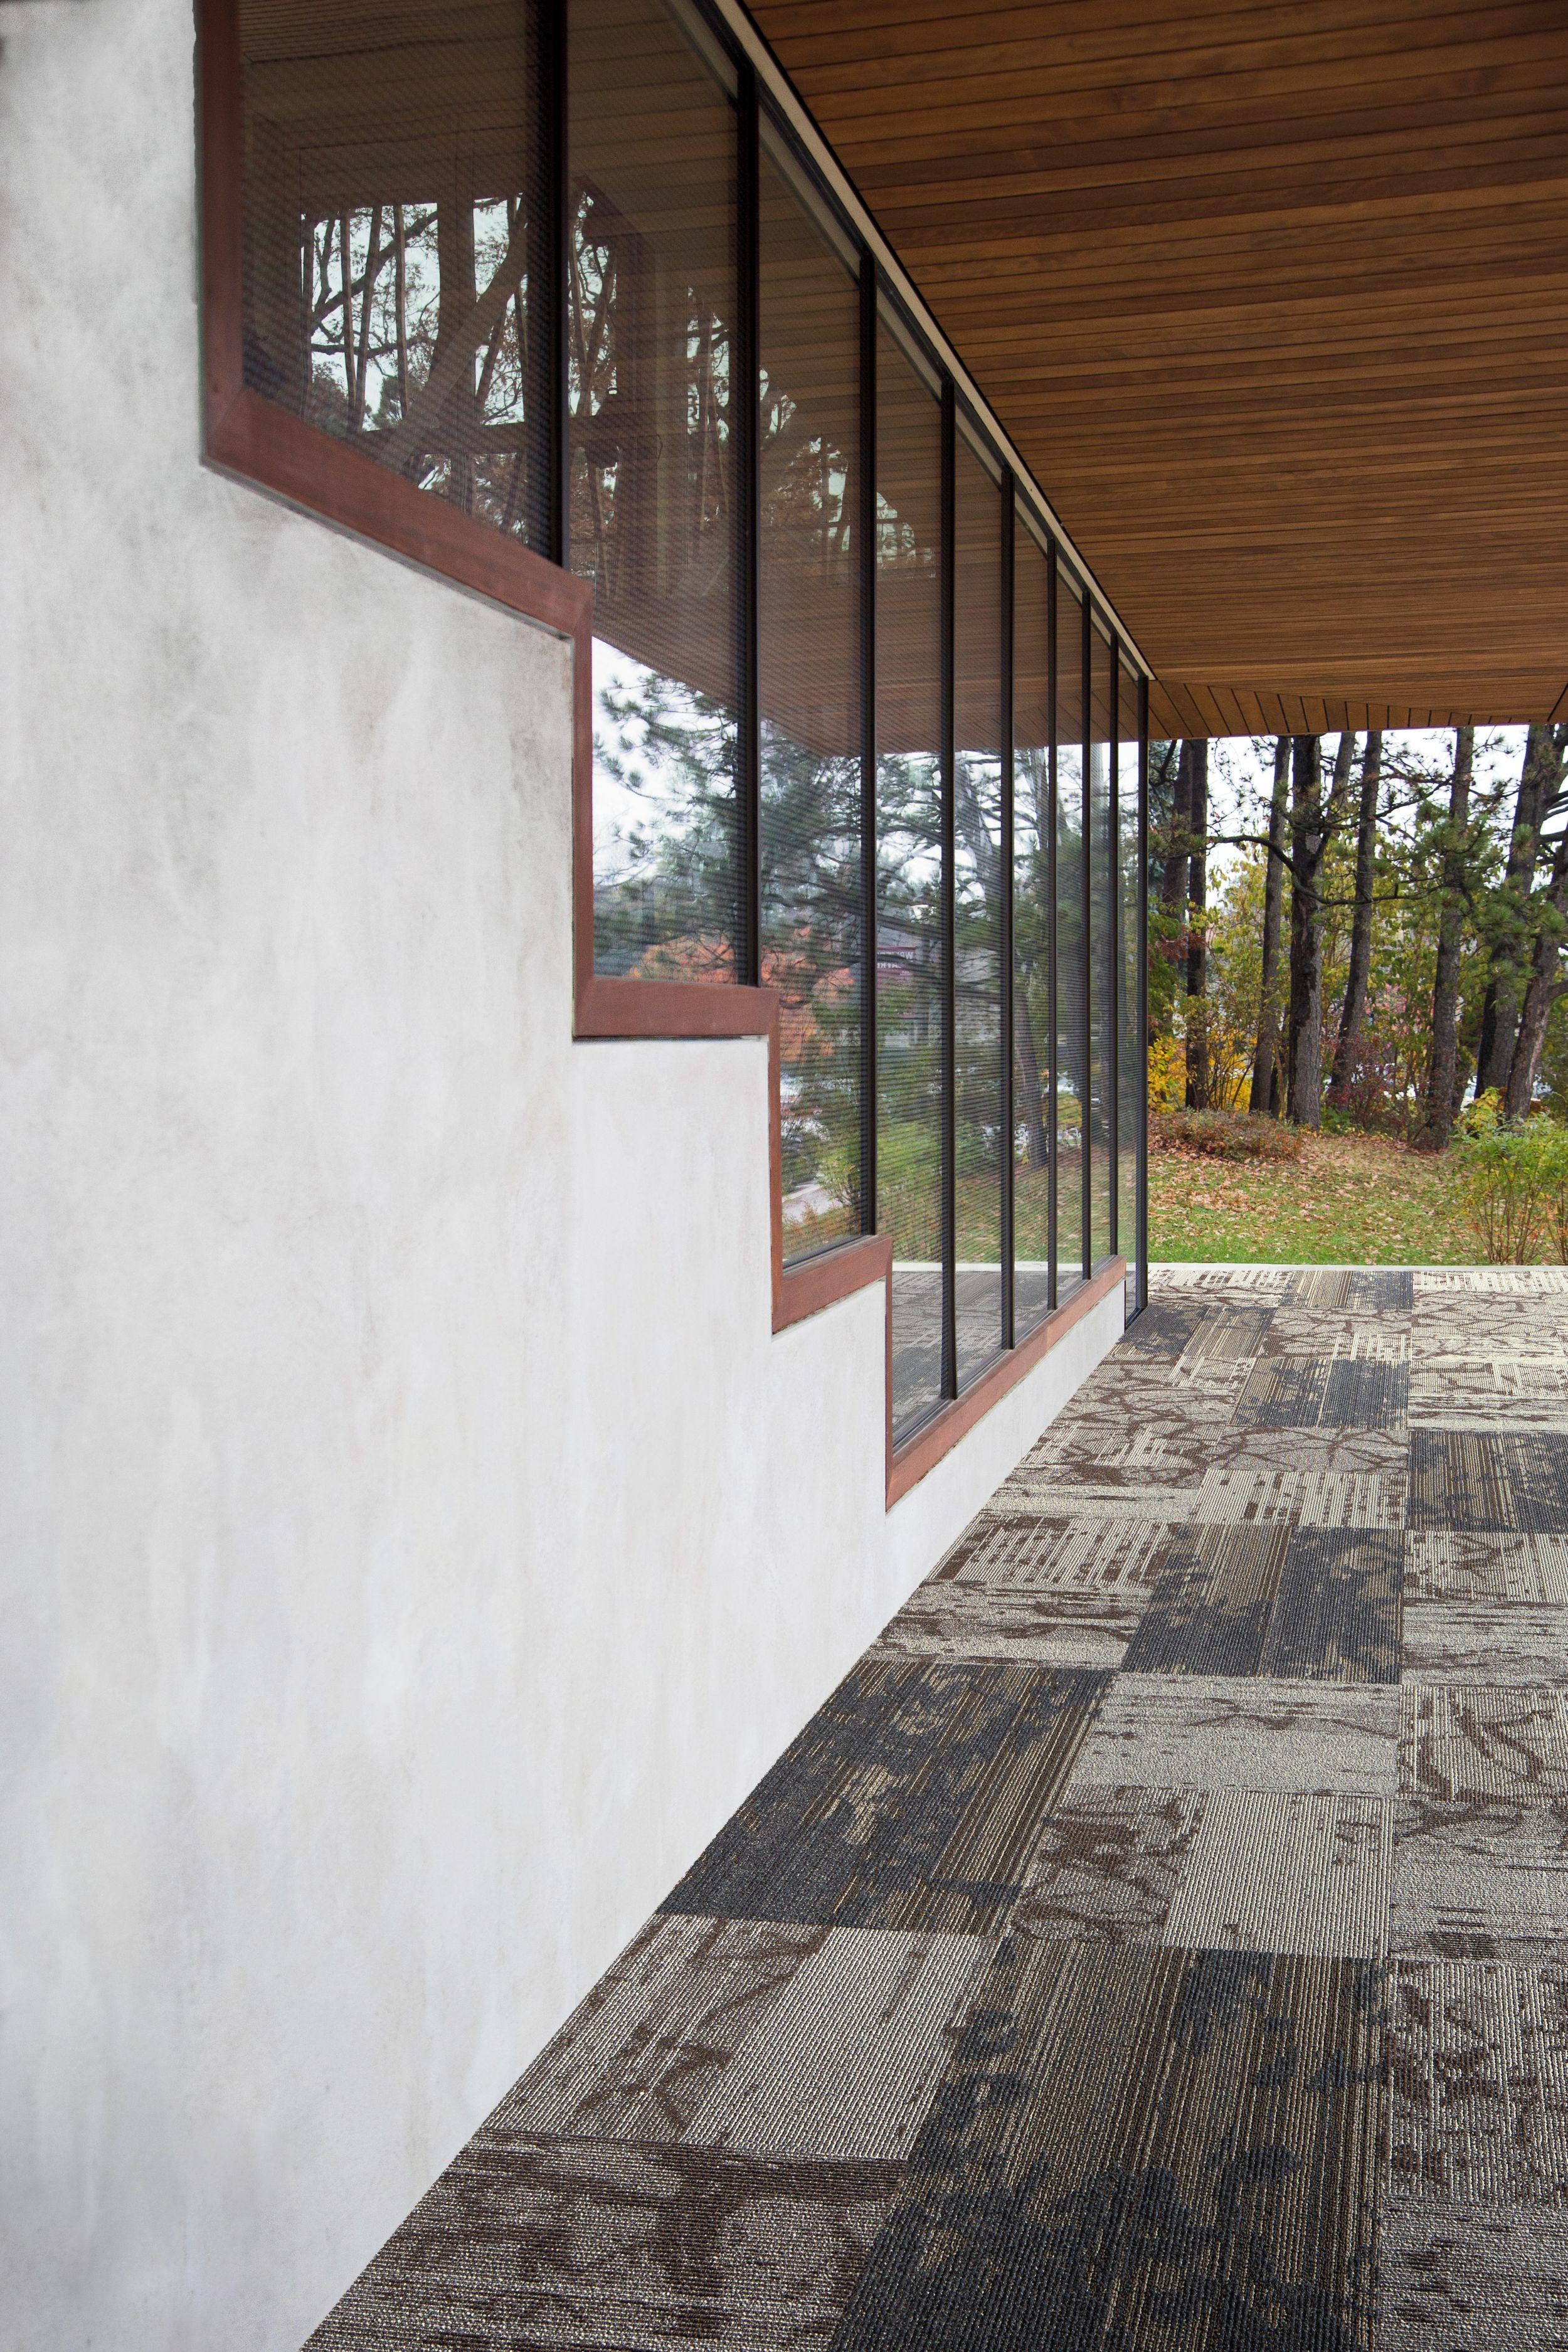 Interface Glazing and Ground plank carpet tile shown for inspiration in outdoor setting numéro d’image 11